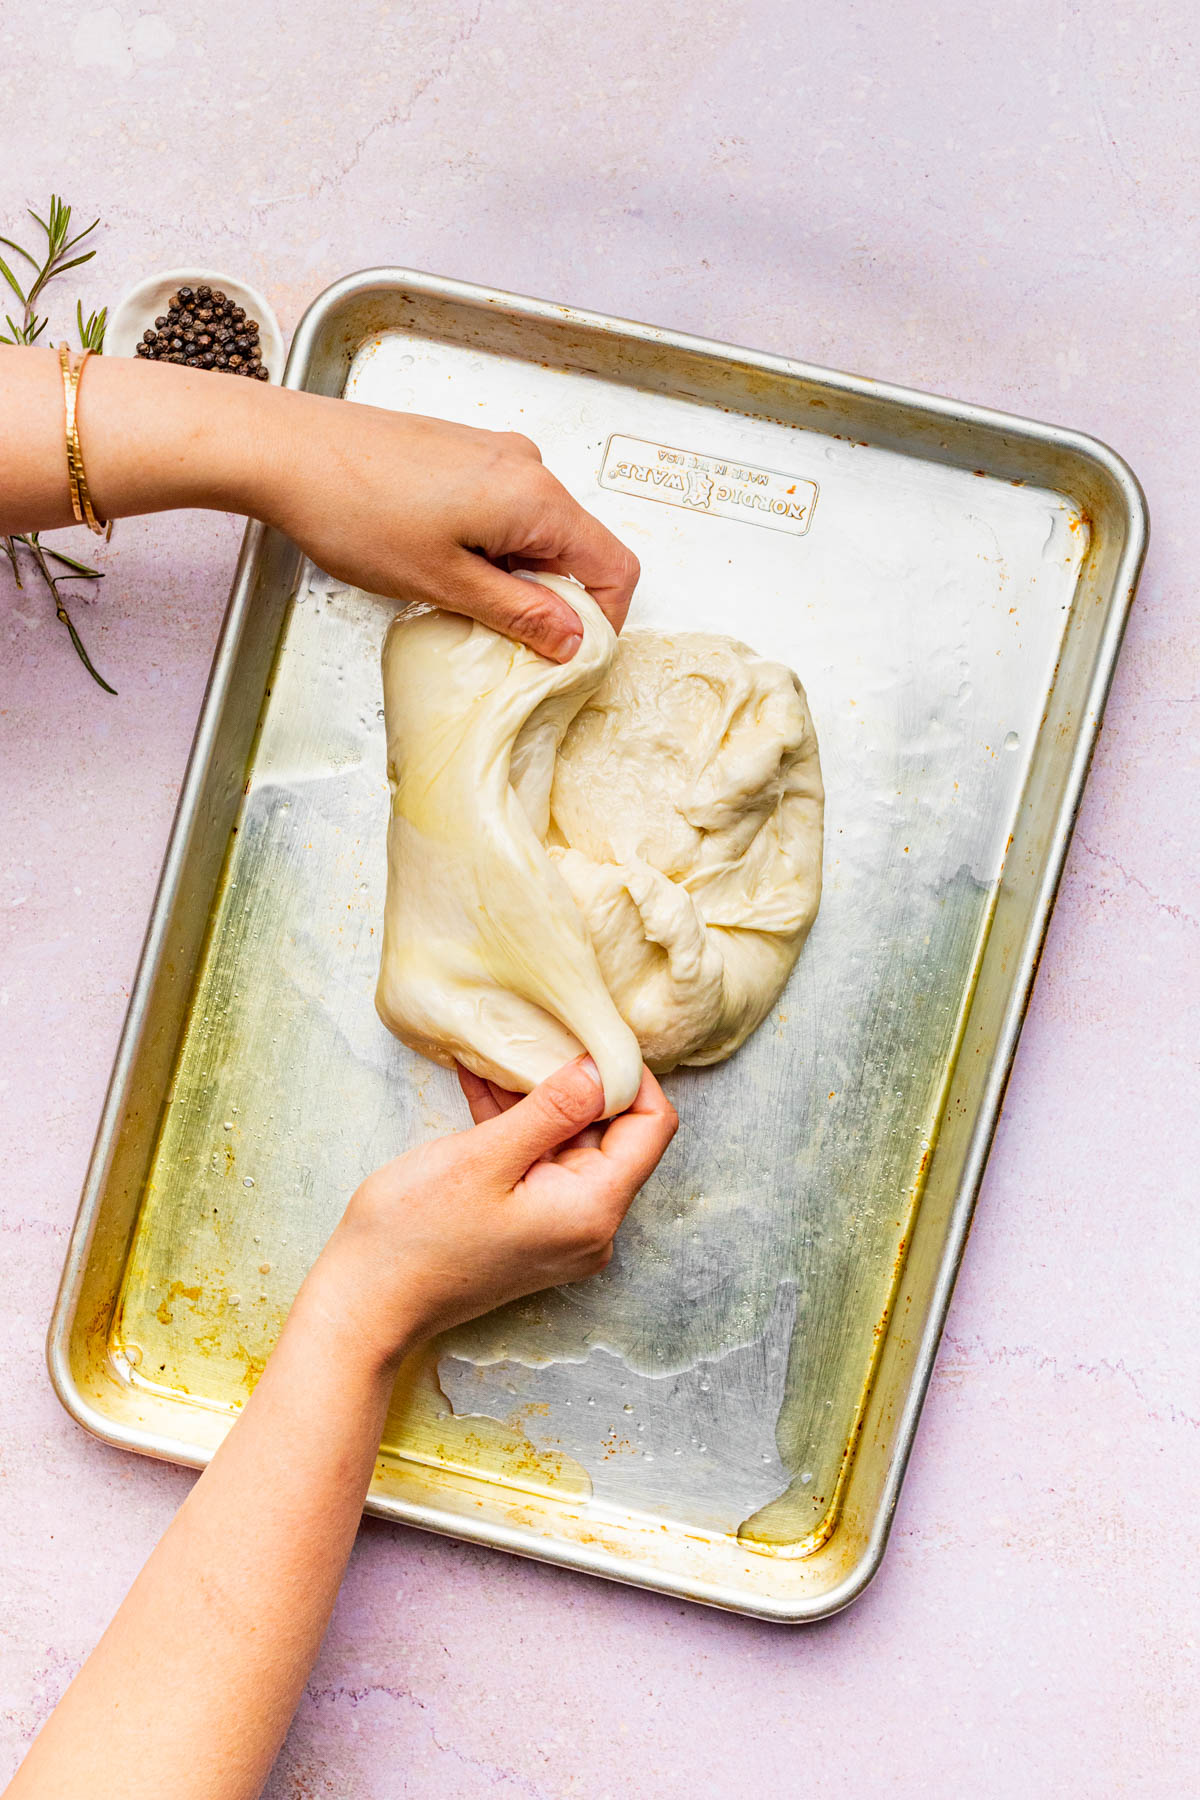 Stretching the dough on the baking sheet.